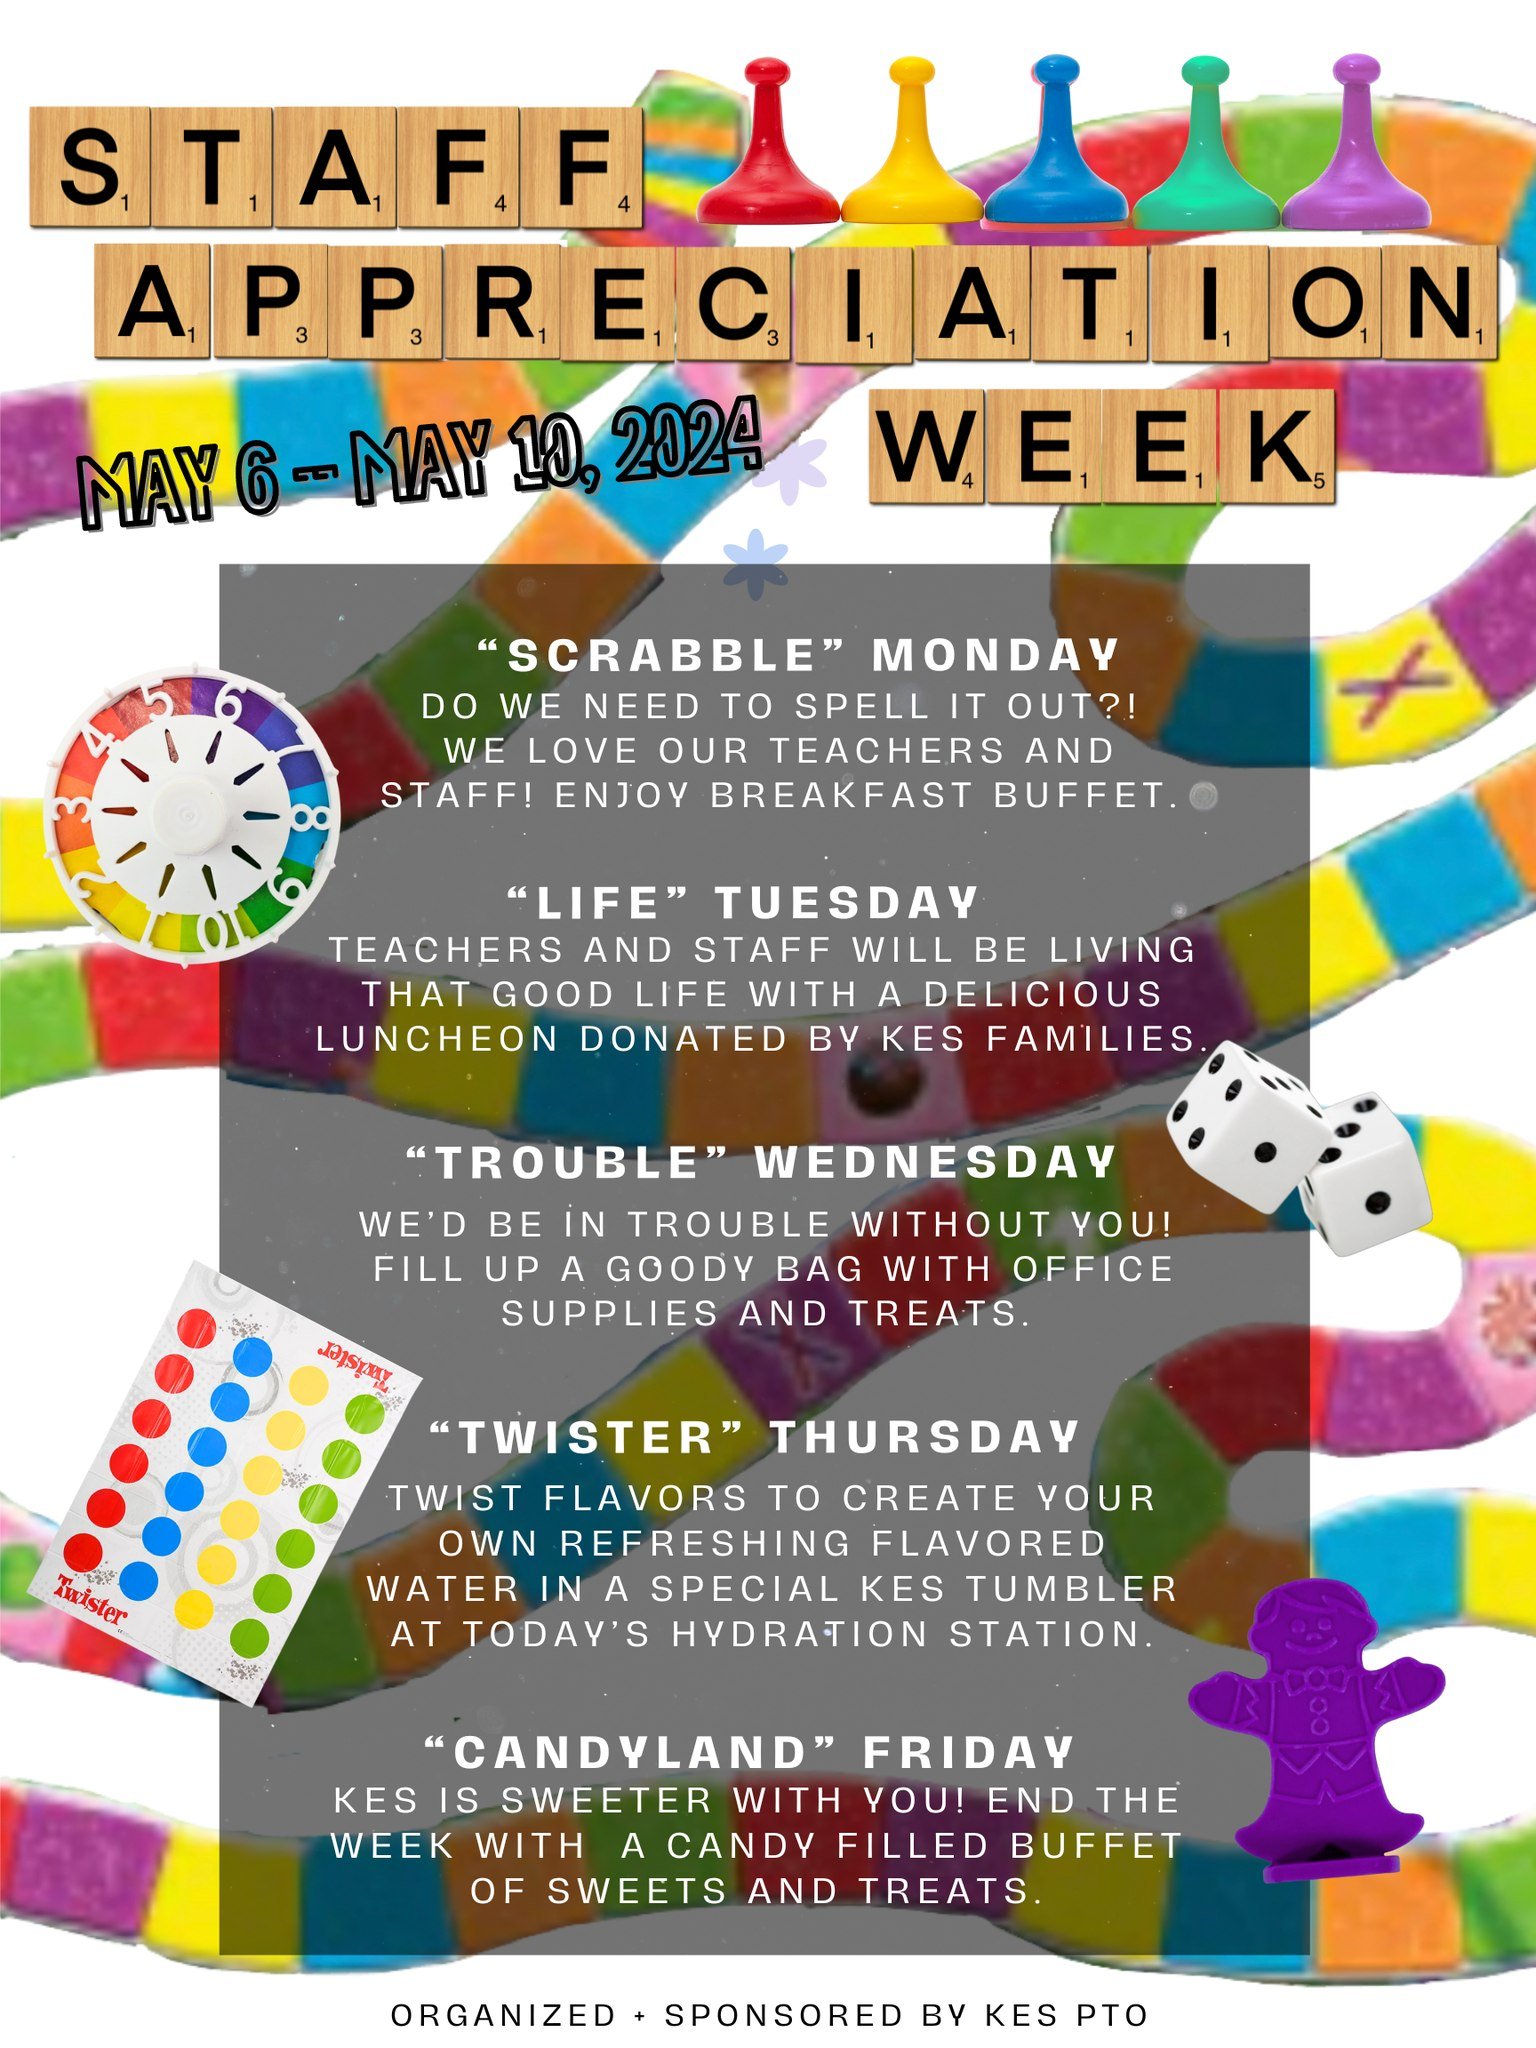 Our amazing Staff Appreciation Committee has been hard at work preparing for Teacher &amp; Staff Appreciation Week! Thank you for supporting the PTO so we can show our #KES Faculty how much they mean to our #KESKids!  To see how you can contribute la